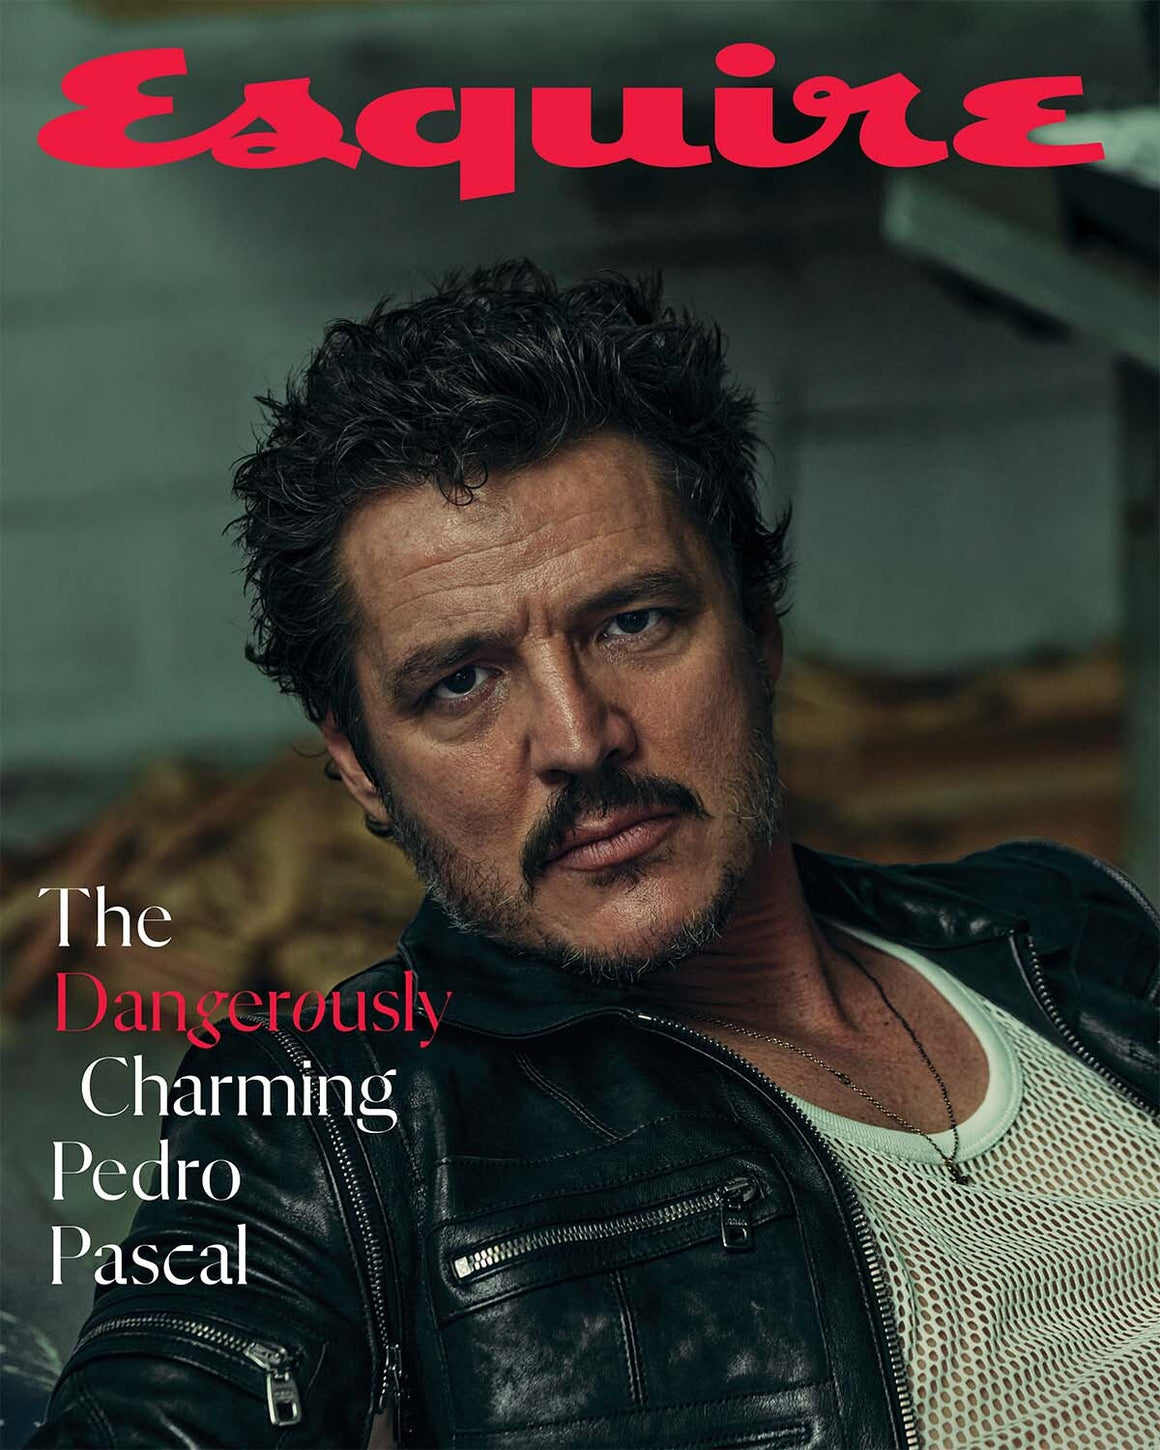 Esquire Magazine (US) - April 2023 - Pedro Pascal (Worldwide Delivery)